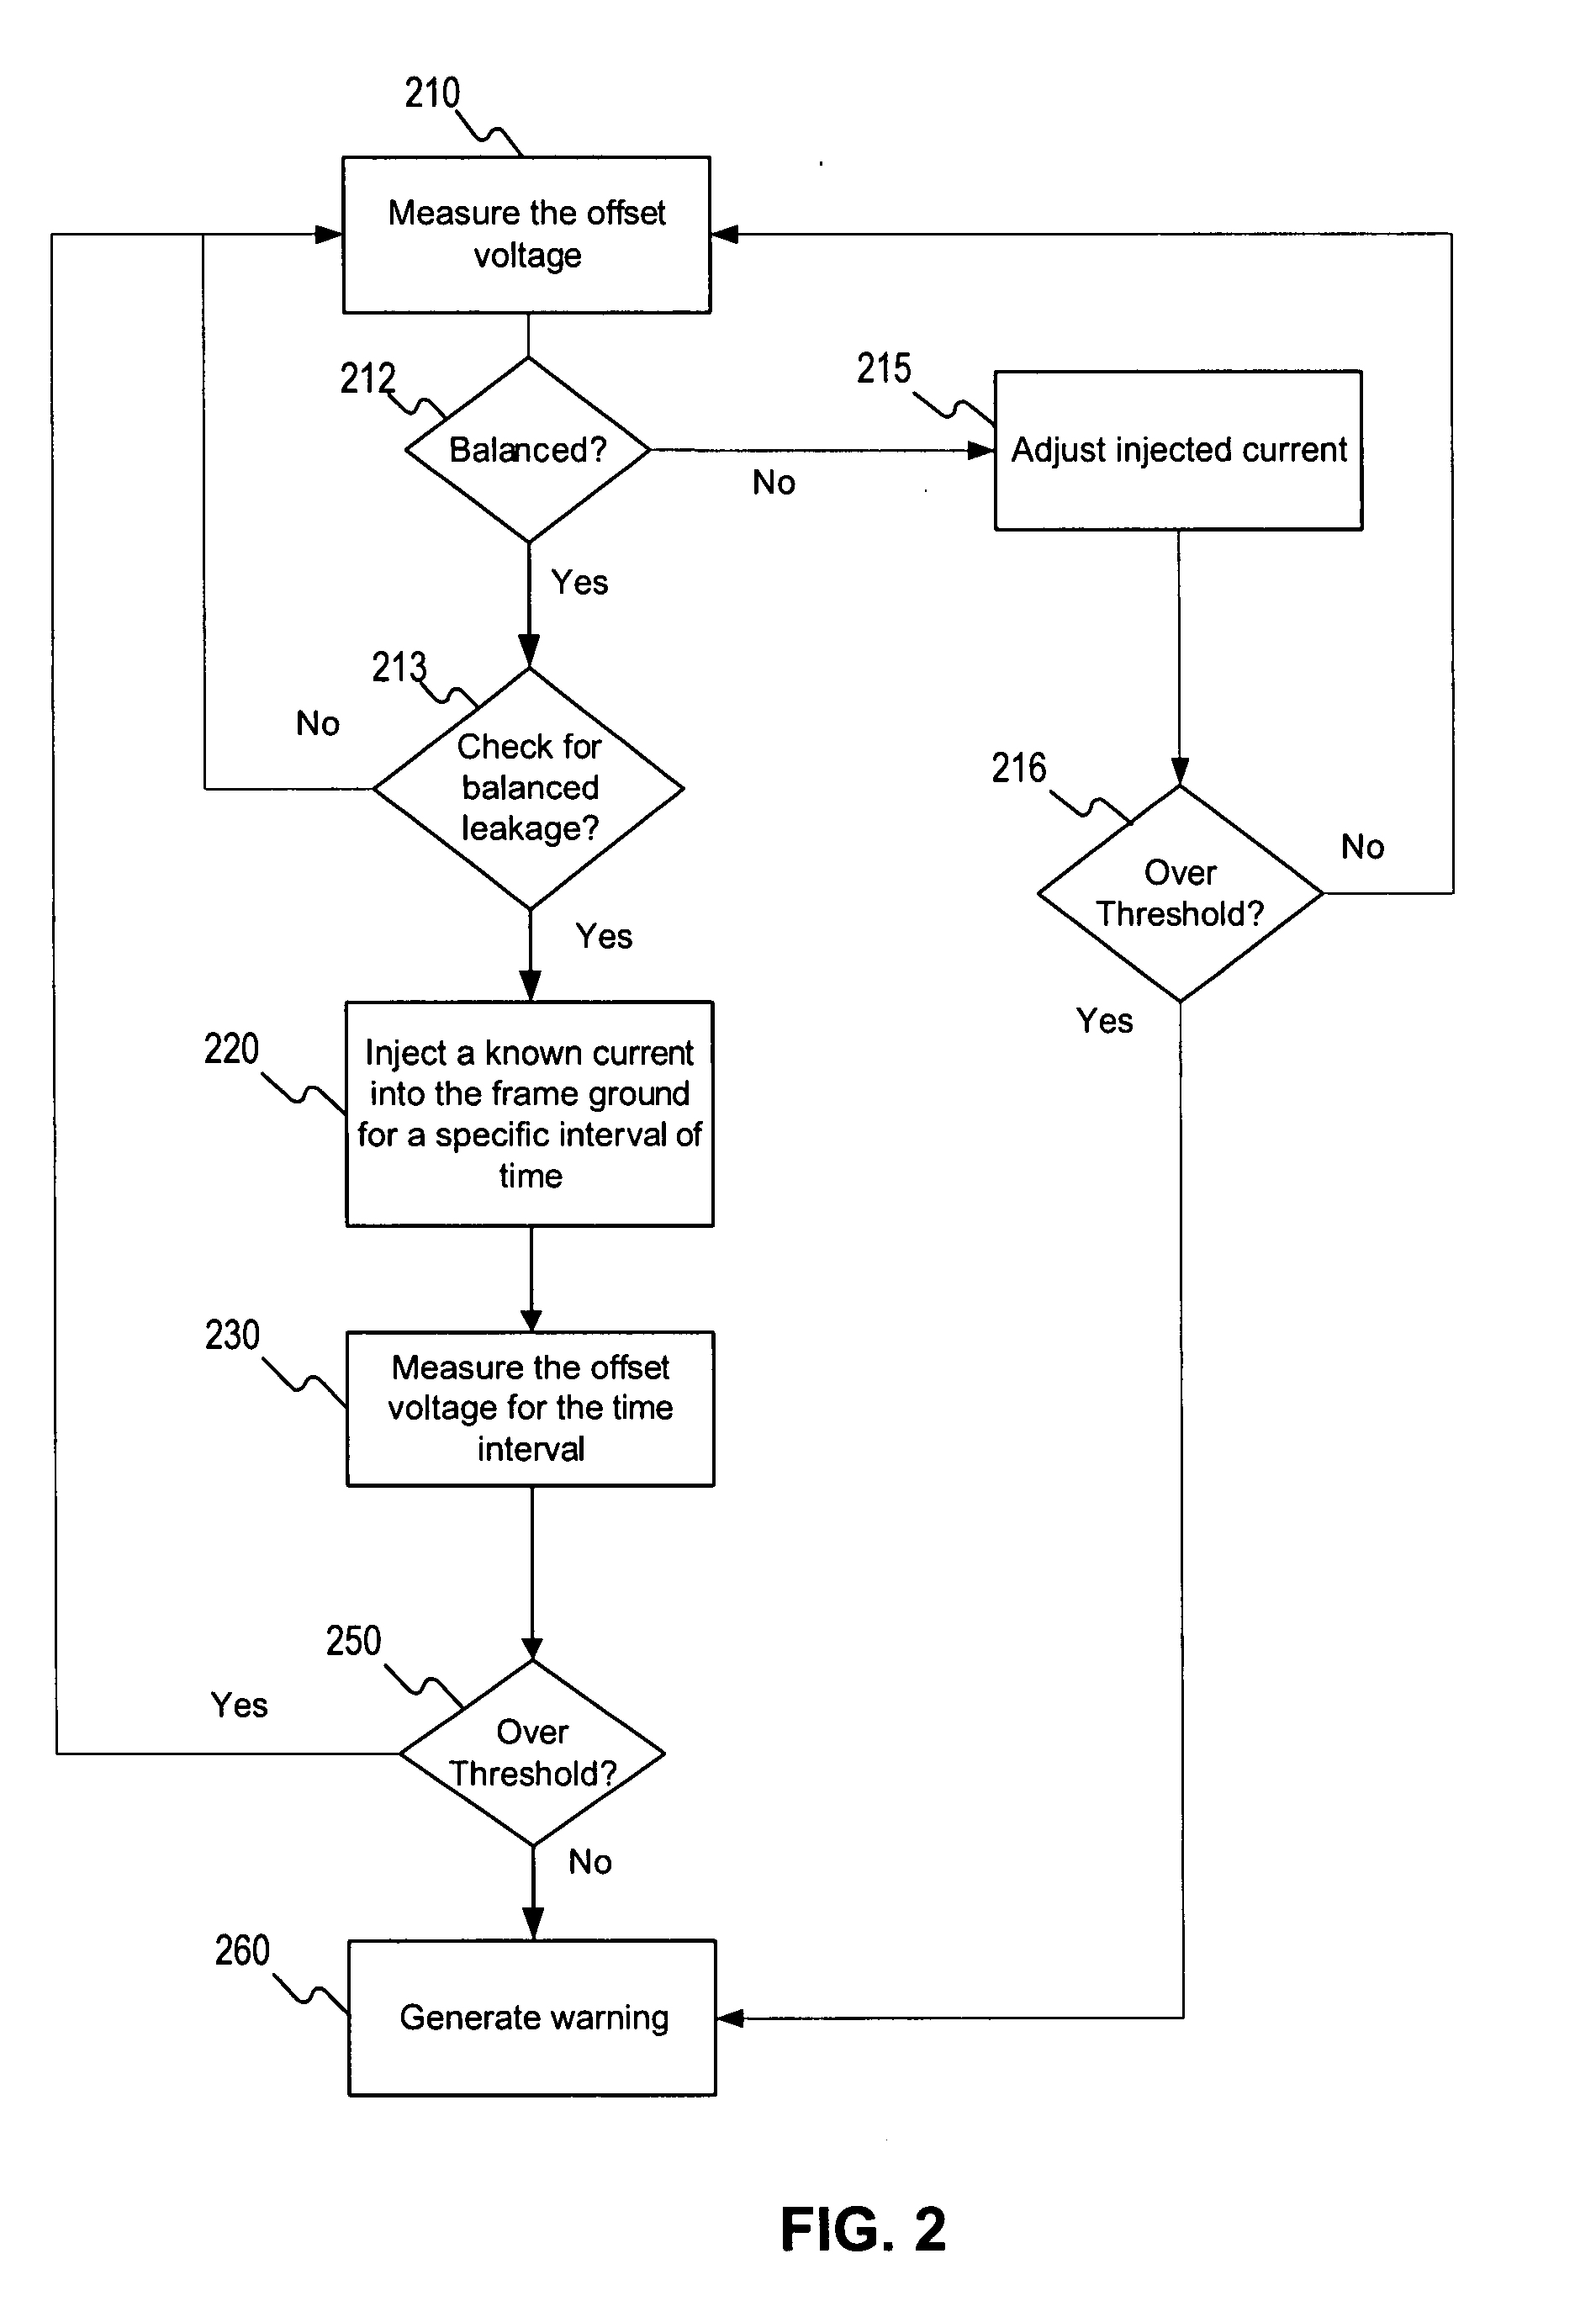 Systems and methods for detecting a faulty ground strap connection